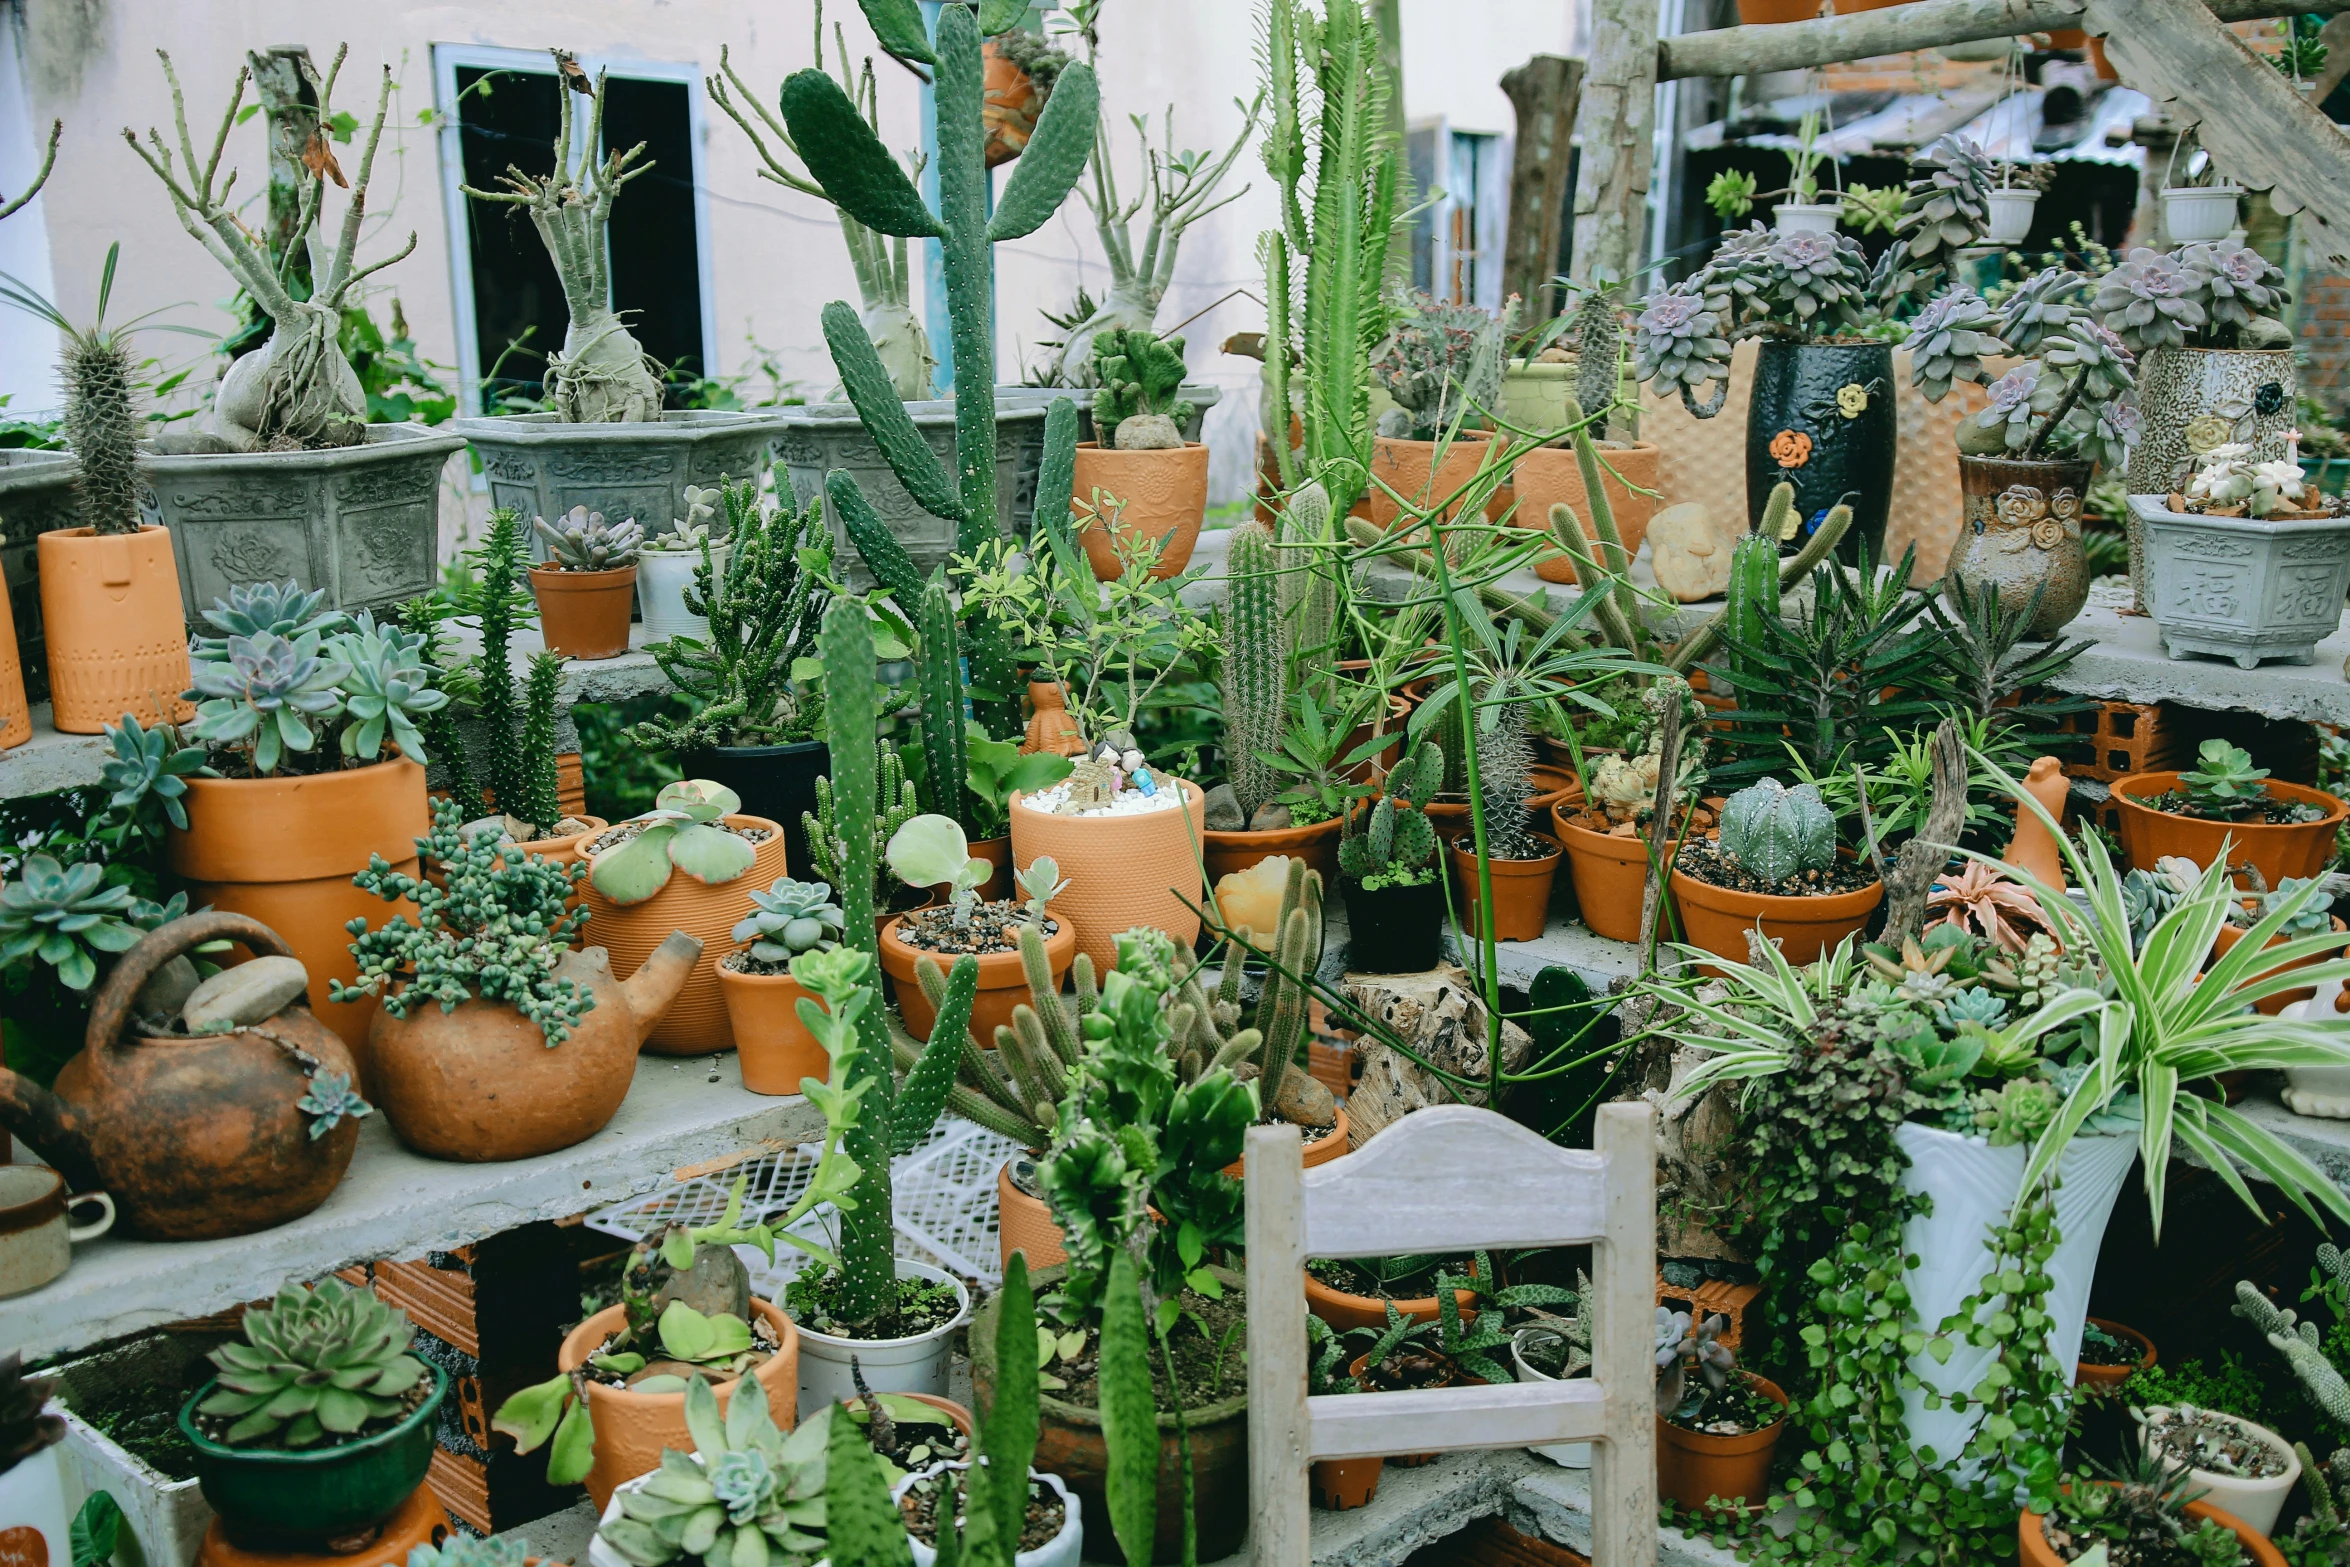 the indoor plants and cactus are displayed in pots